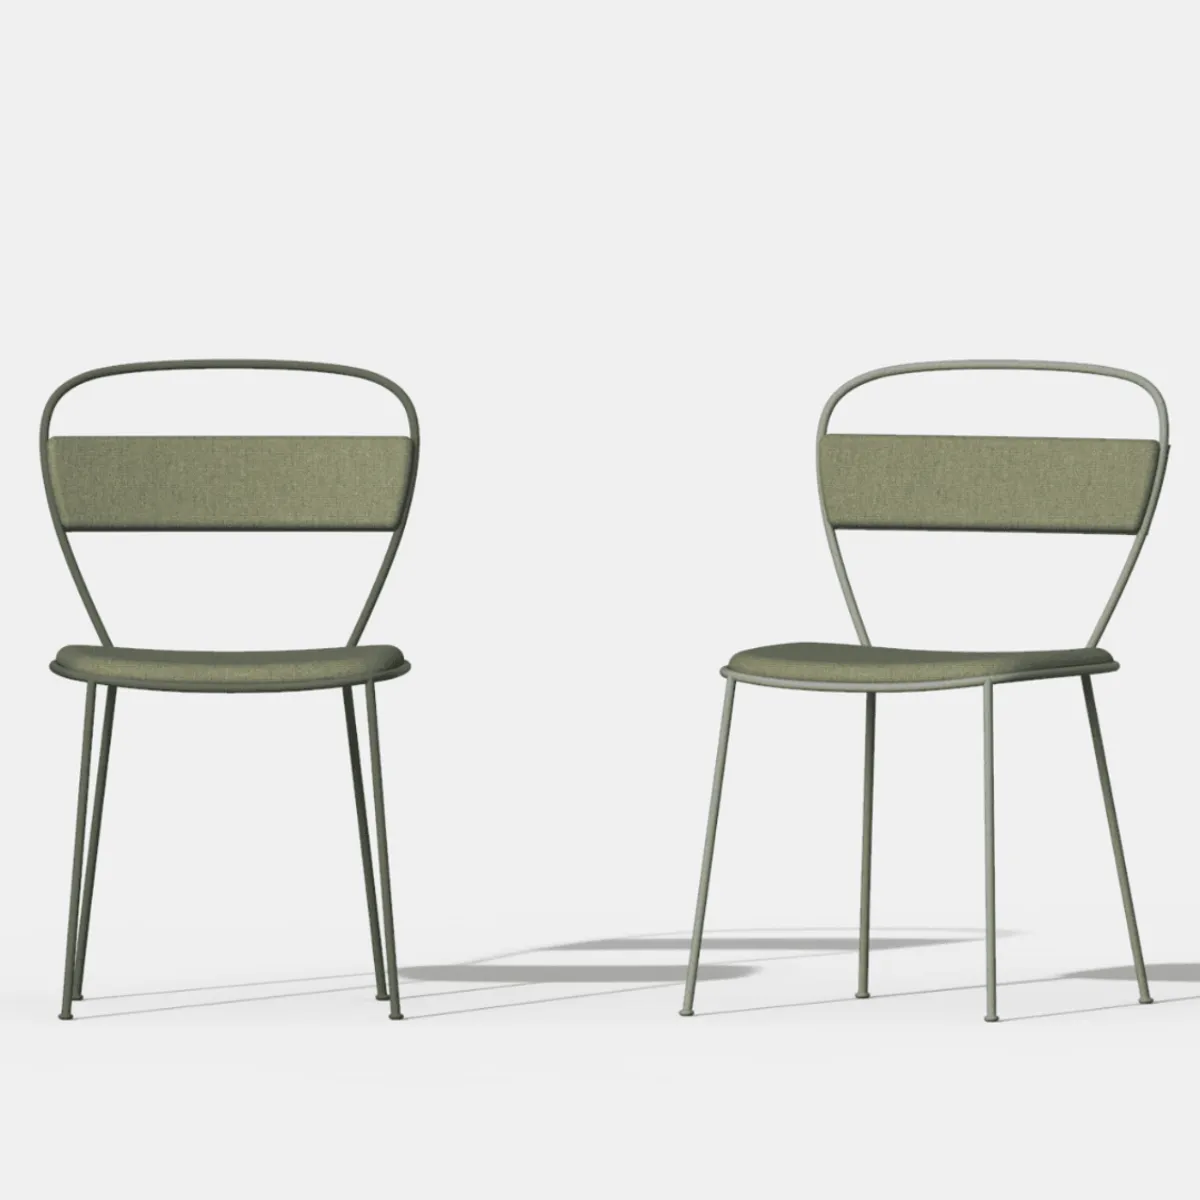 Sedna side chair 2